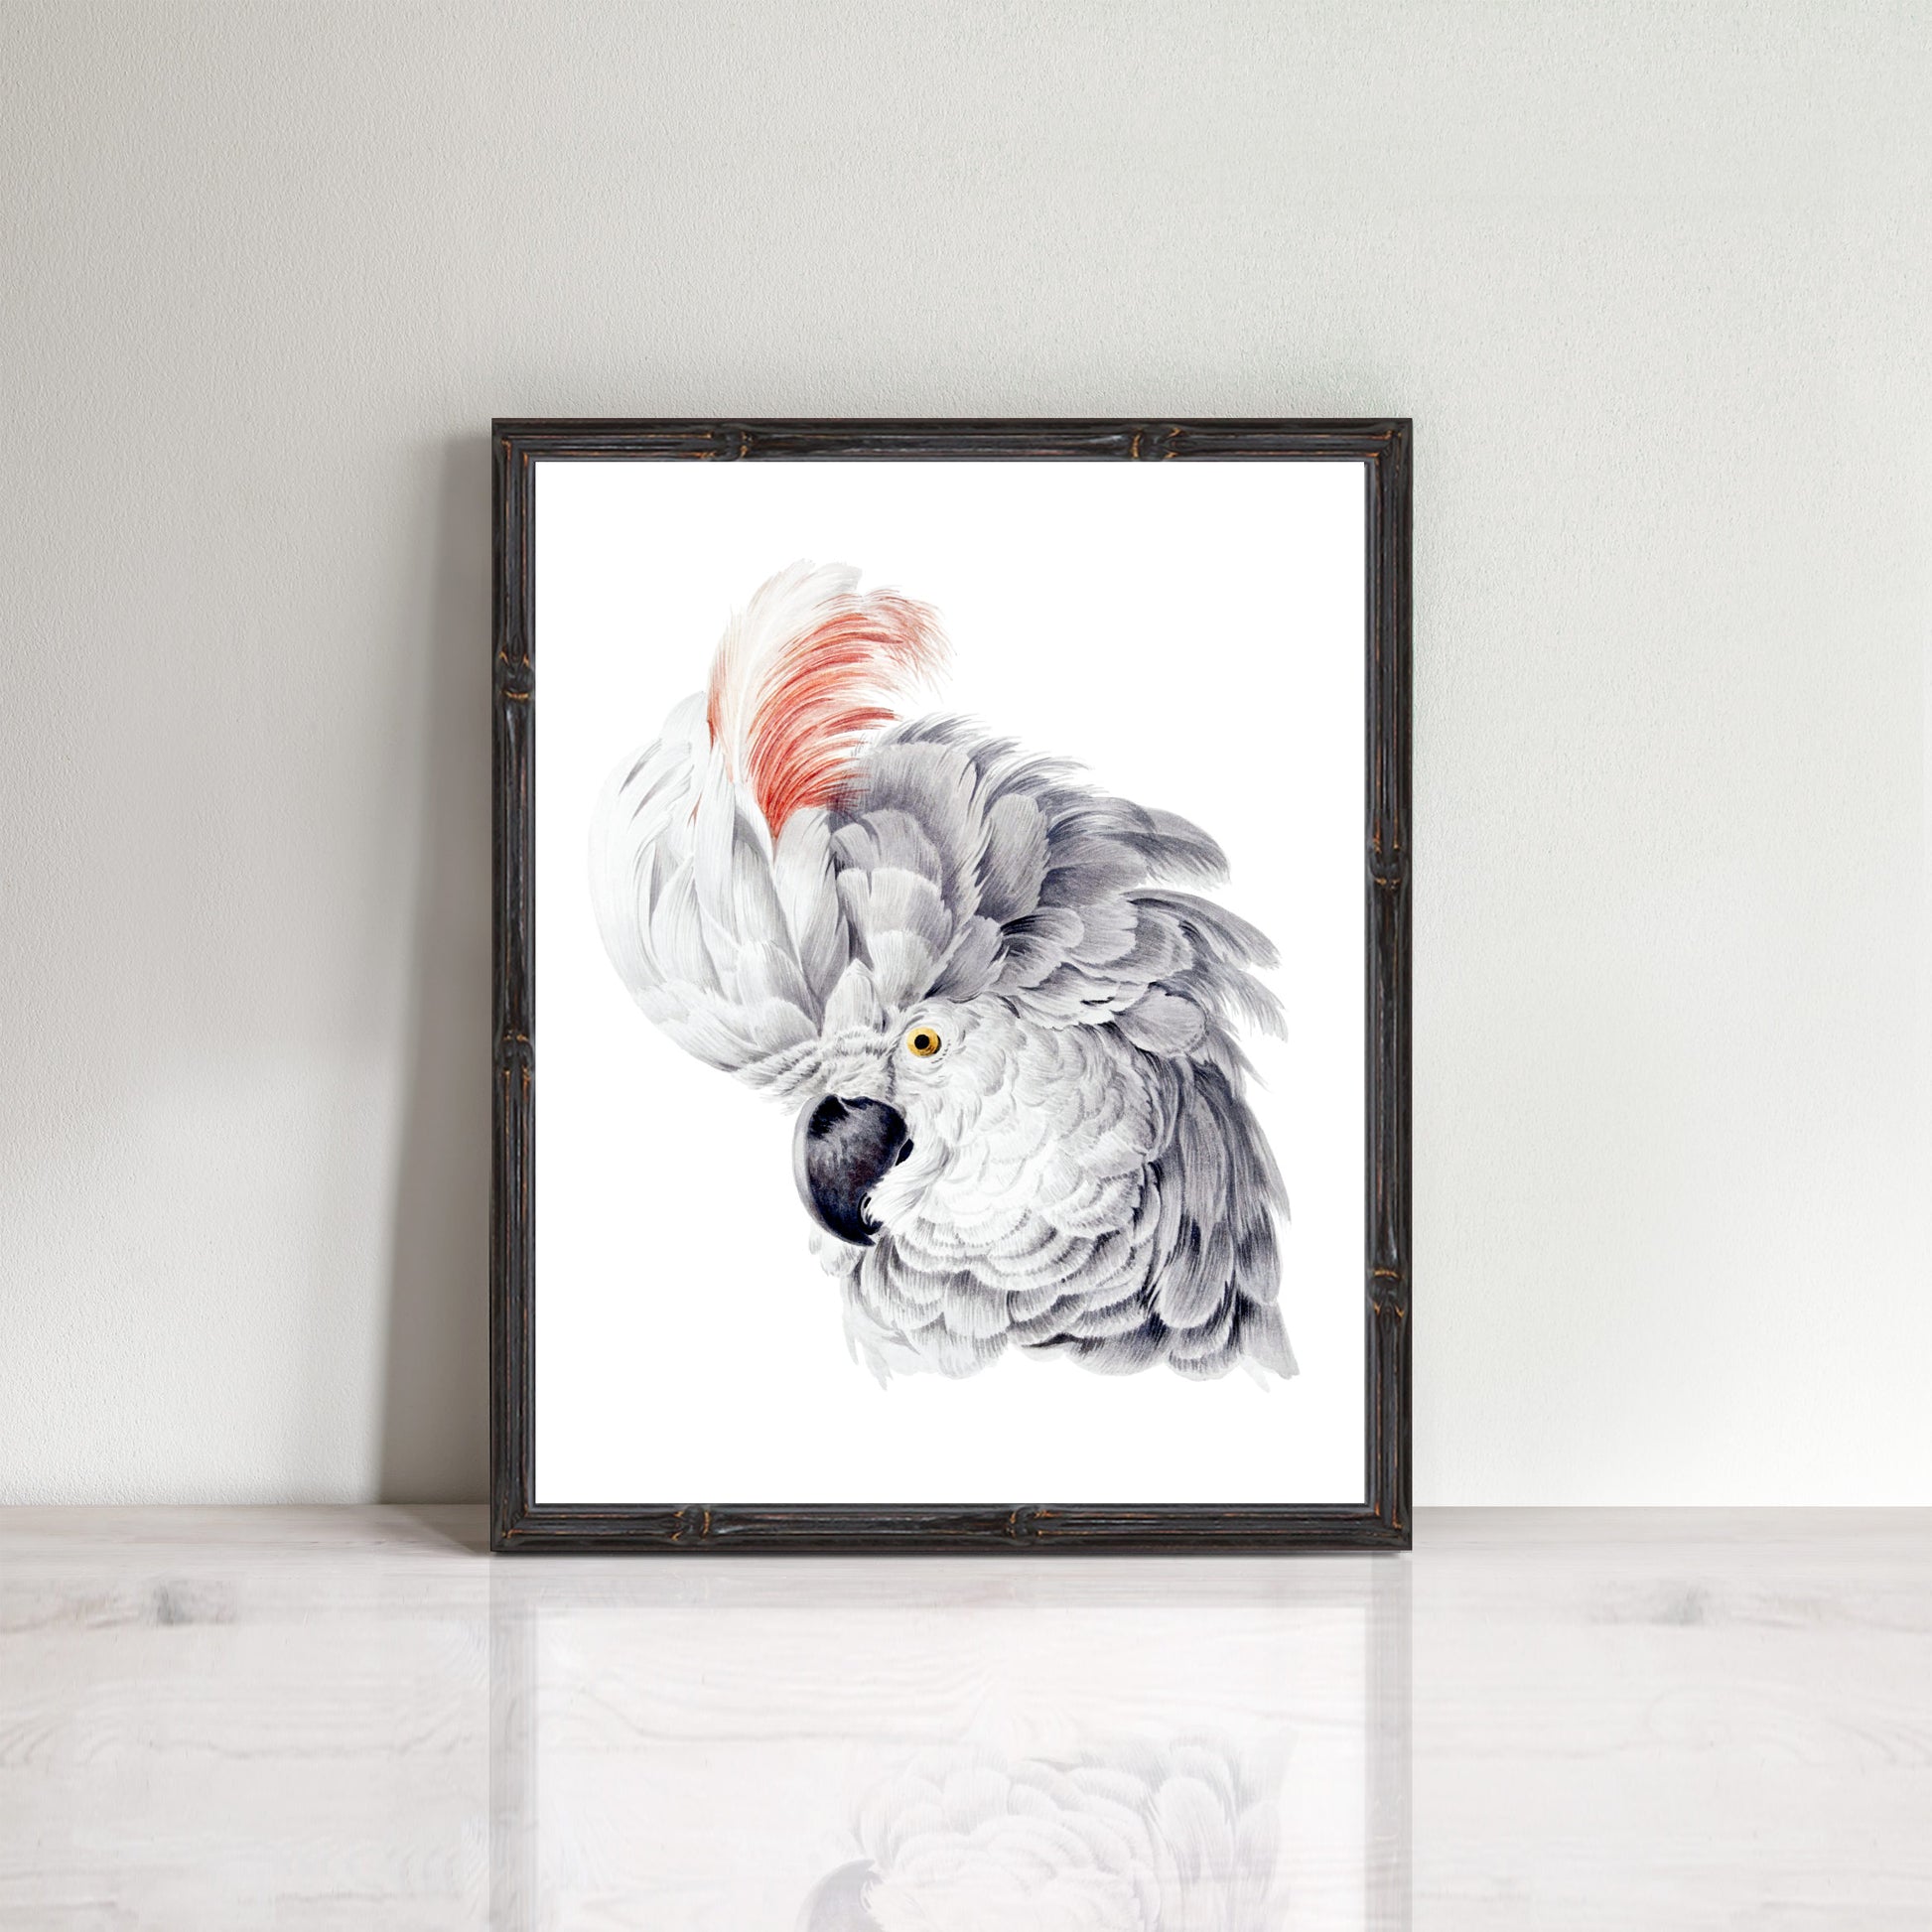 vintage cockatoo head print with ruffled feathers